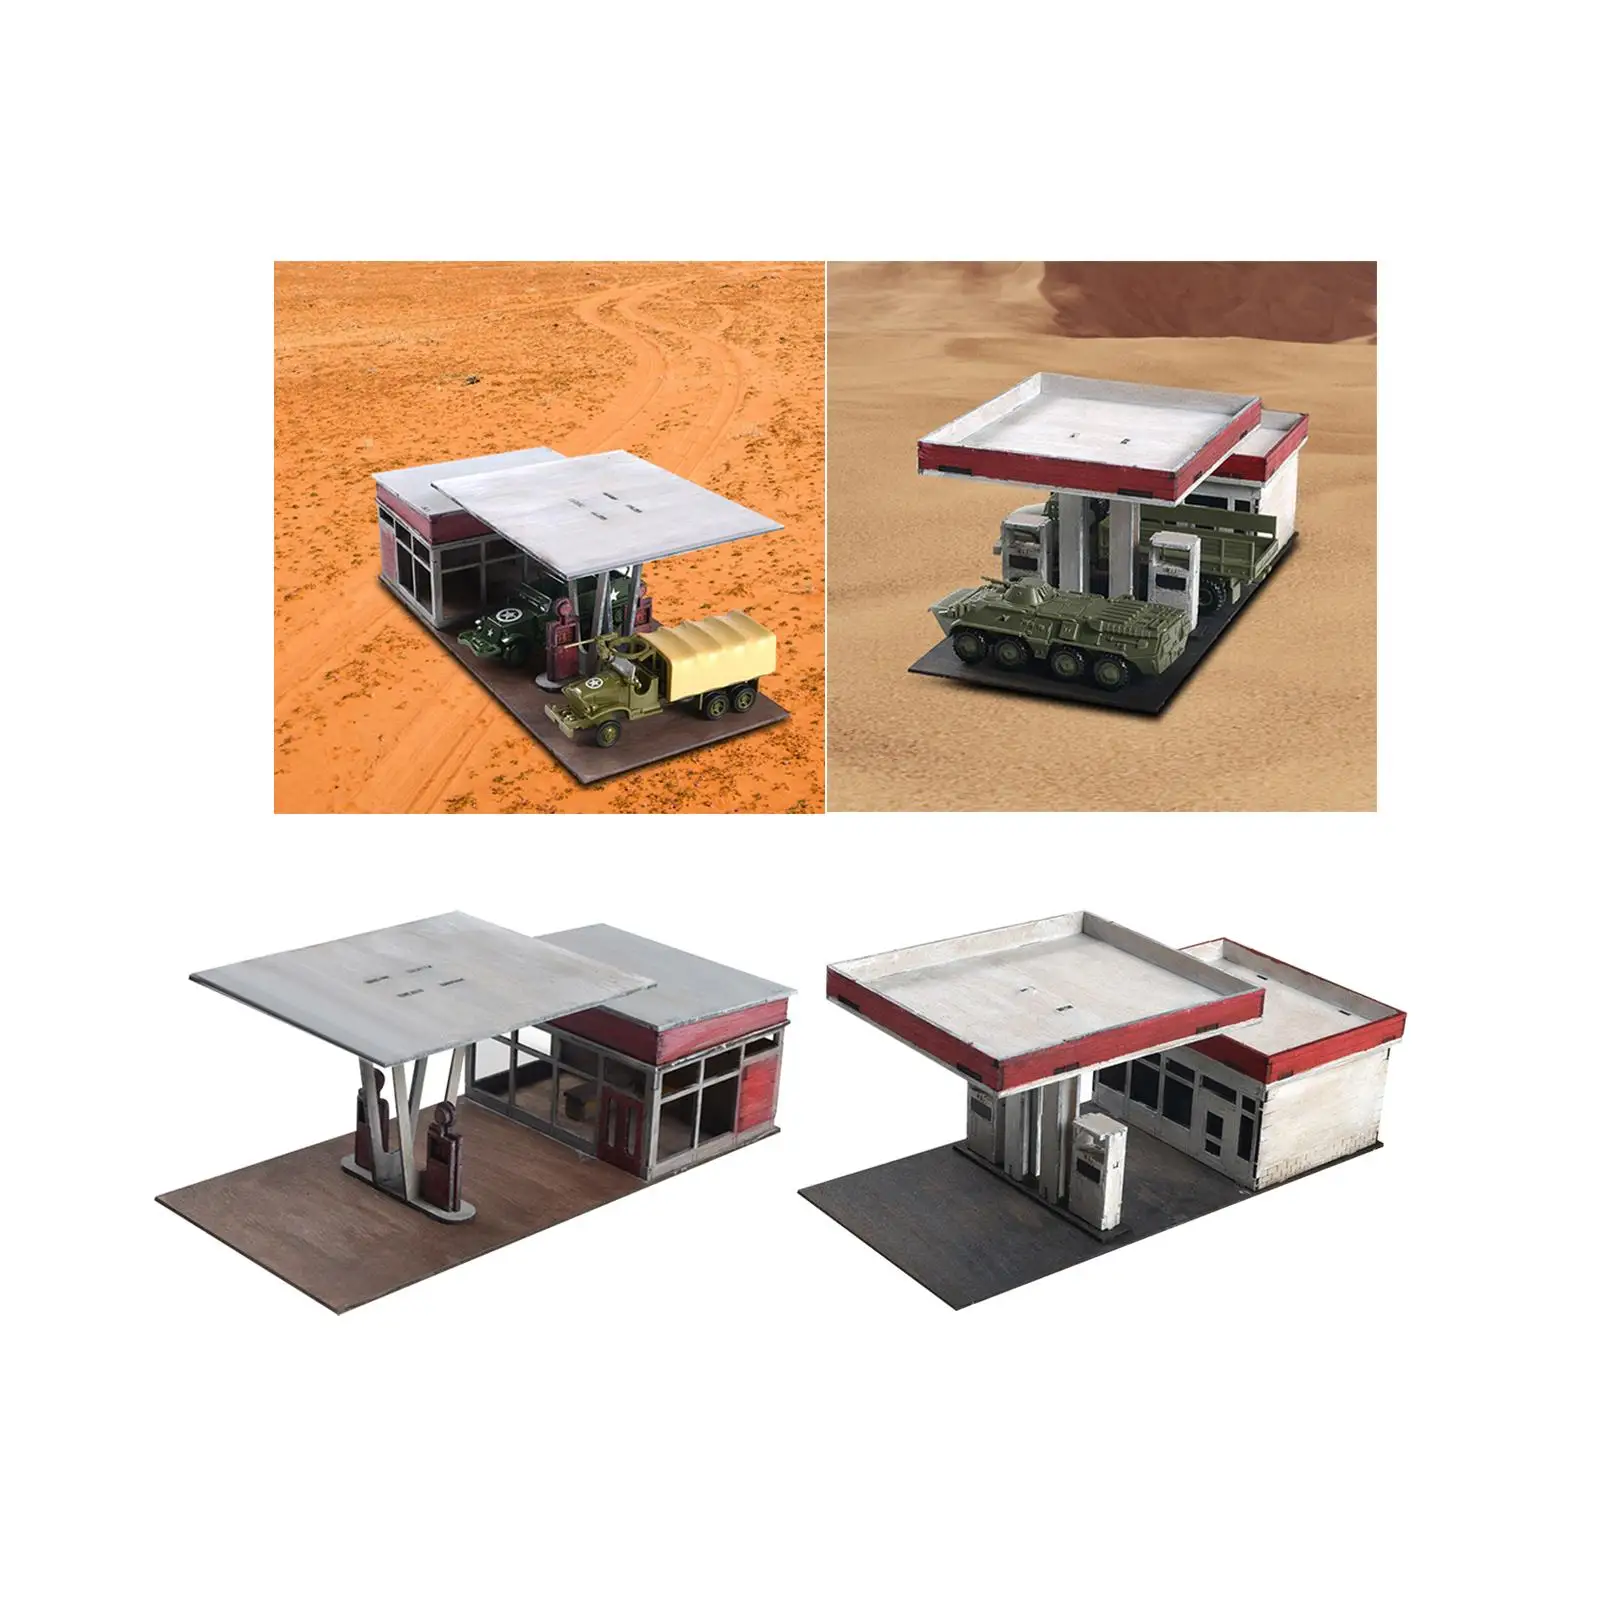 1/72 1/64 Building Model Kits Gas Station Architecture Scene for Micro Landscape Layout War Scene Sand Table Architecture Model